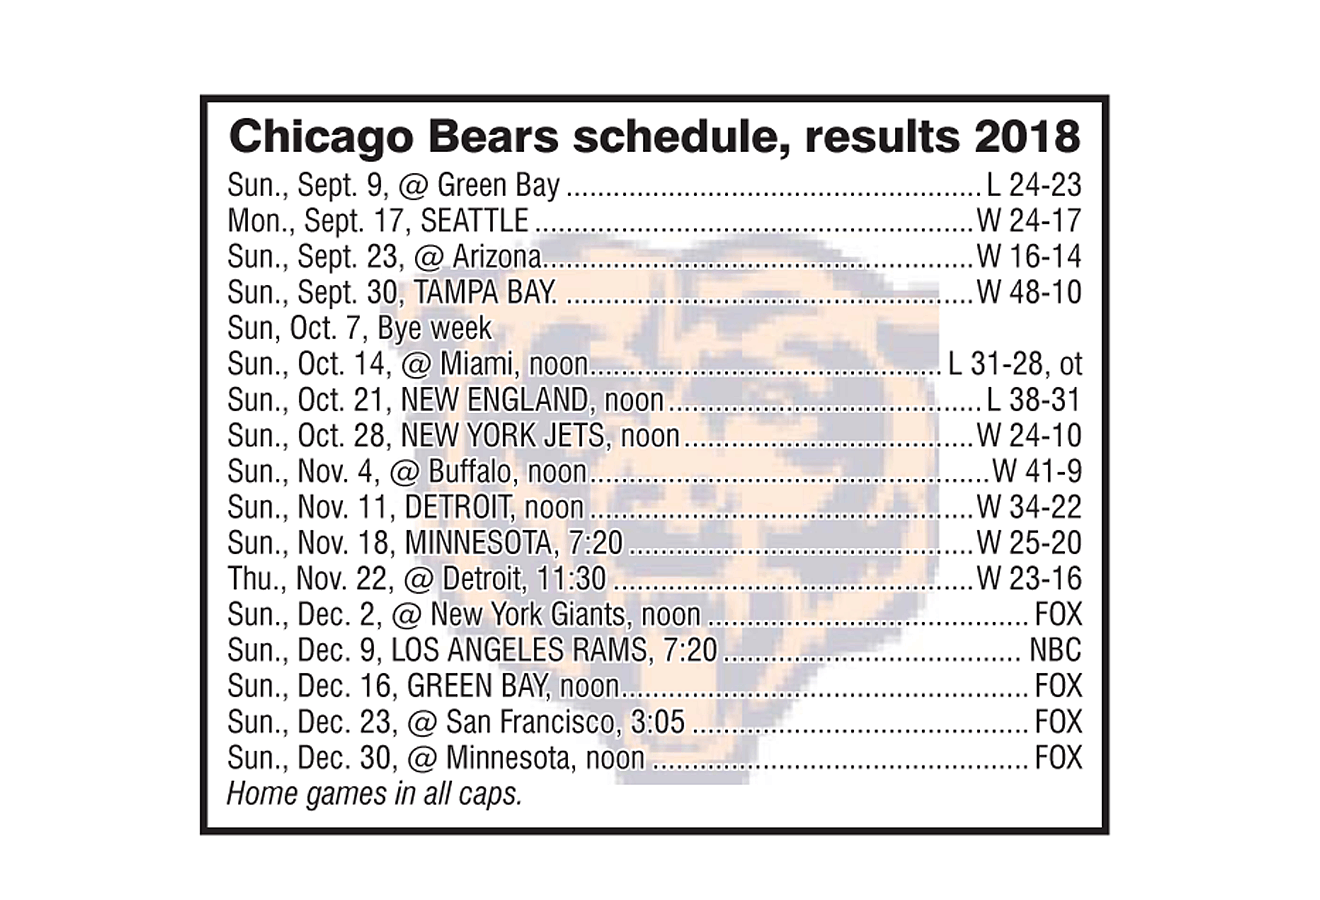 Chicago Bears 2018 schedule and results through November 22, 2018